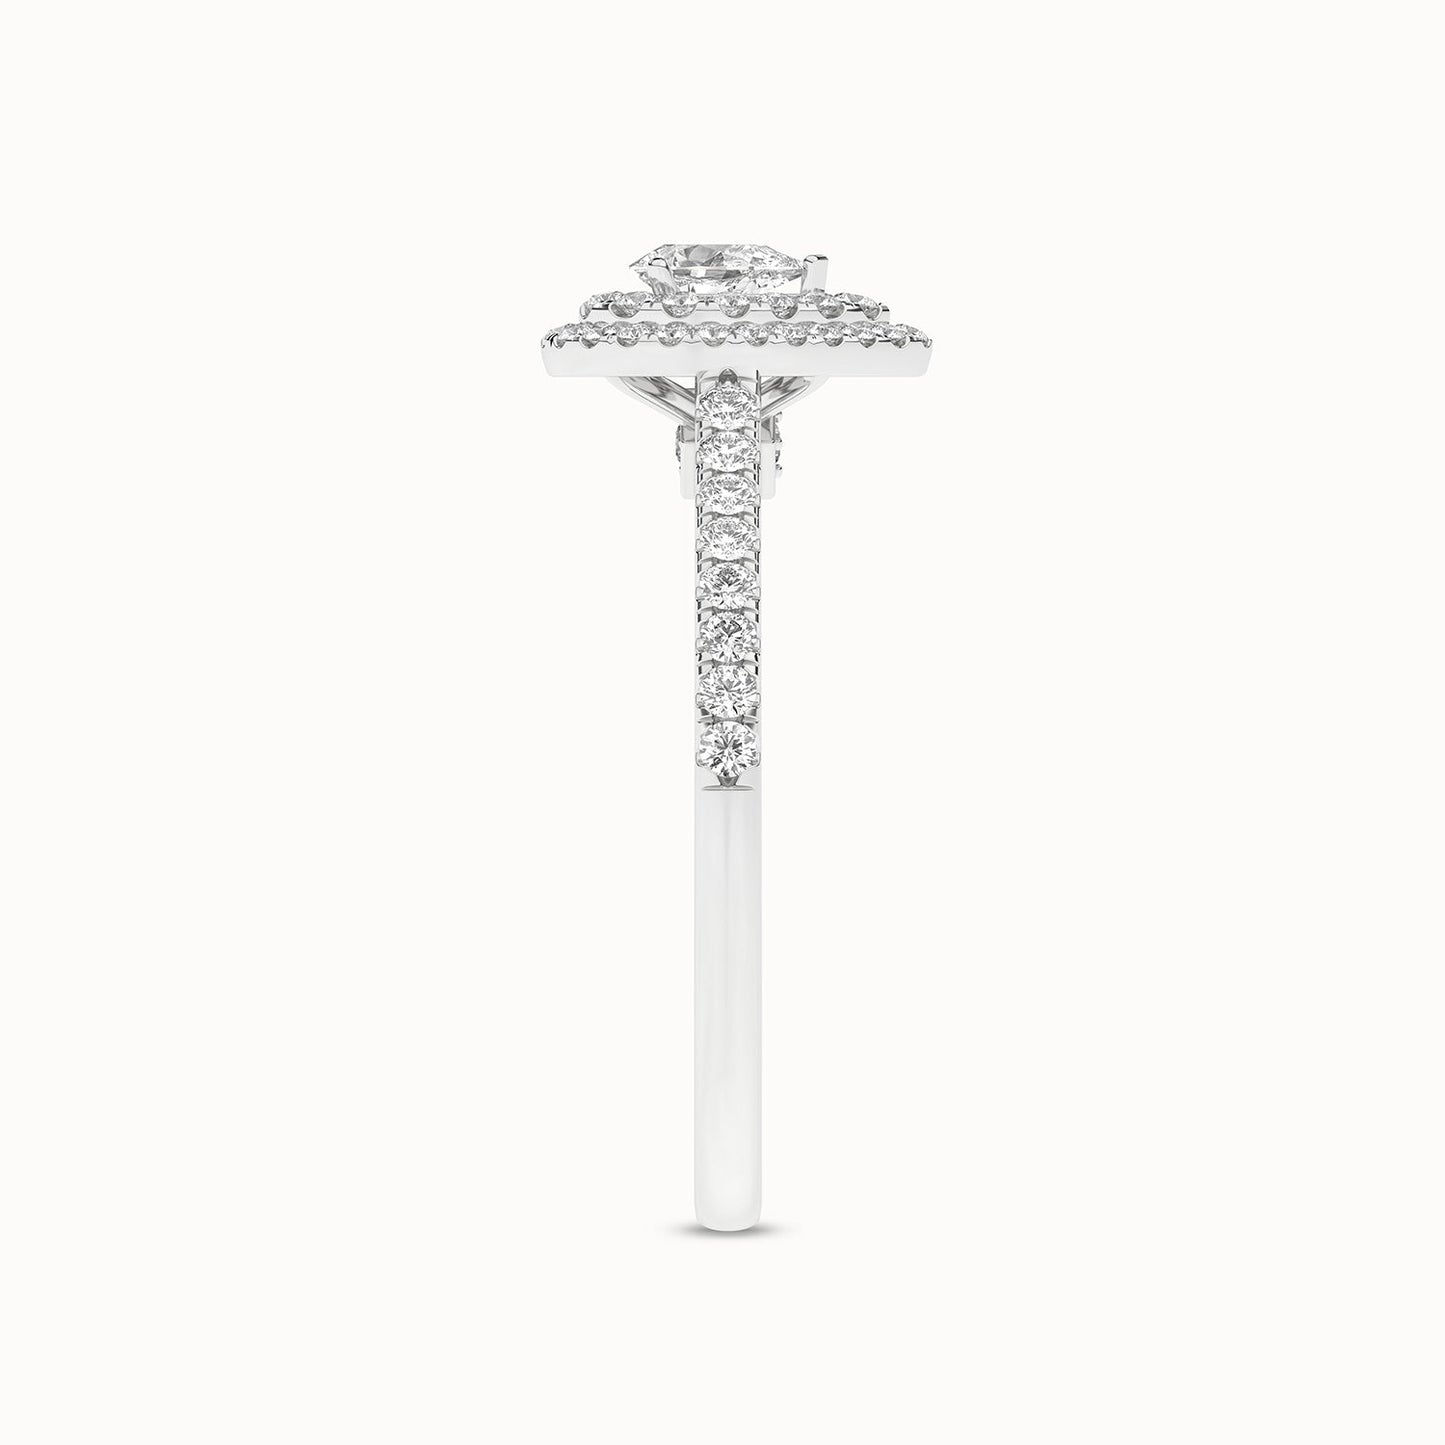 Signature Dewdrop Double halo Ring_Product Angle_1/2-4